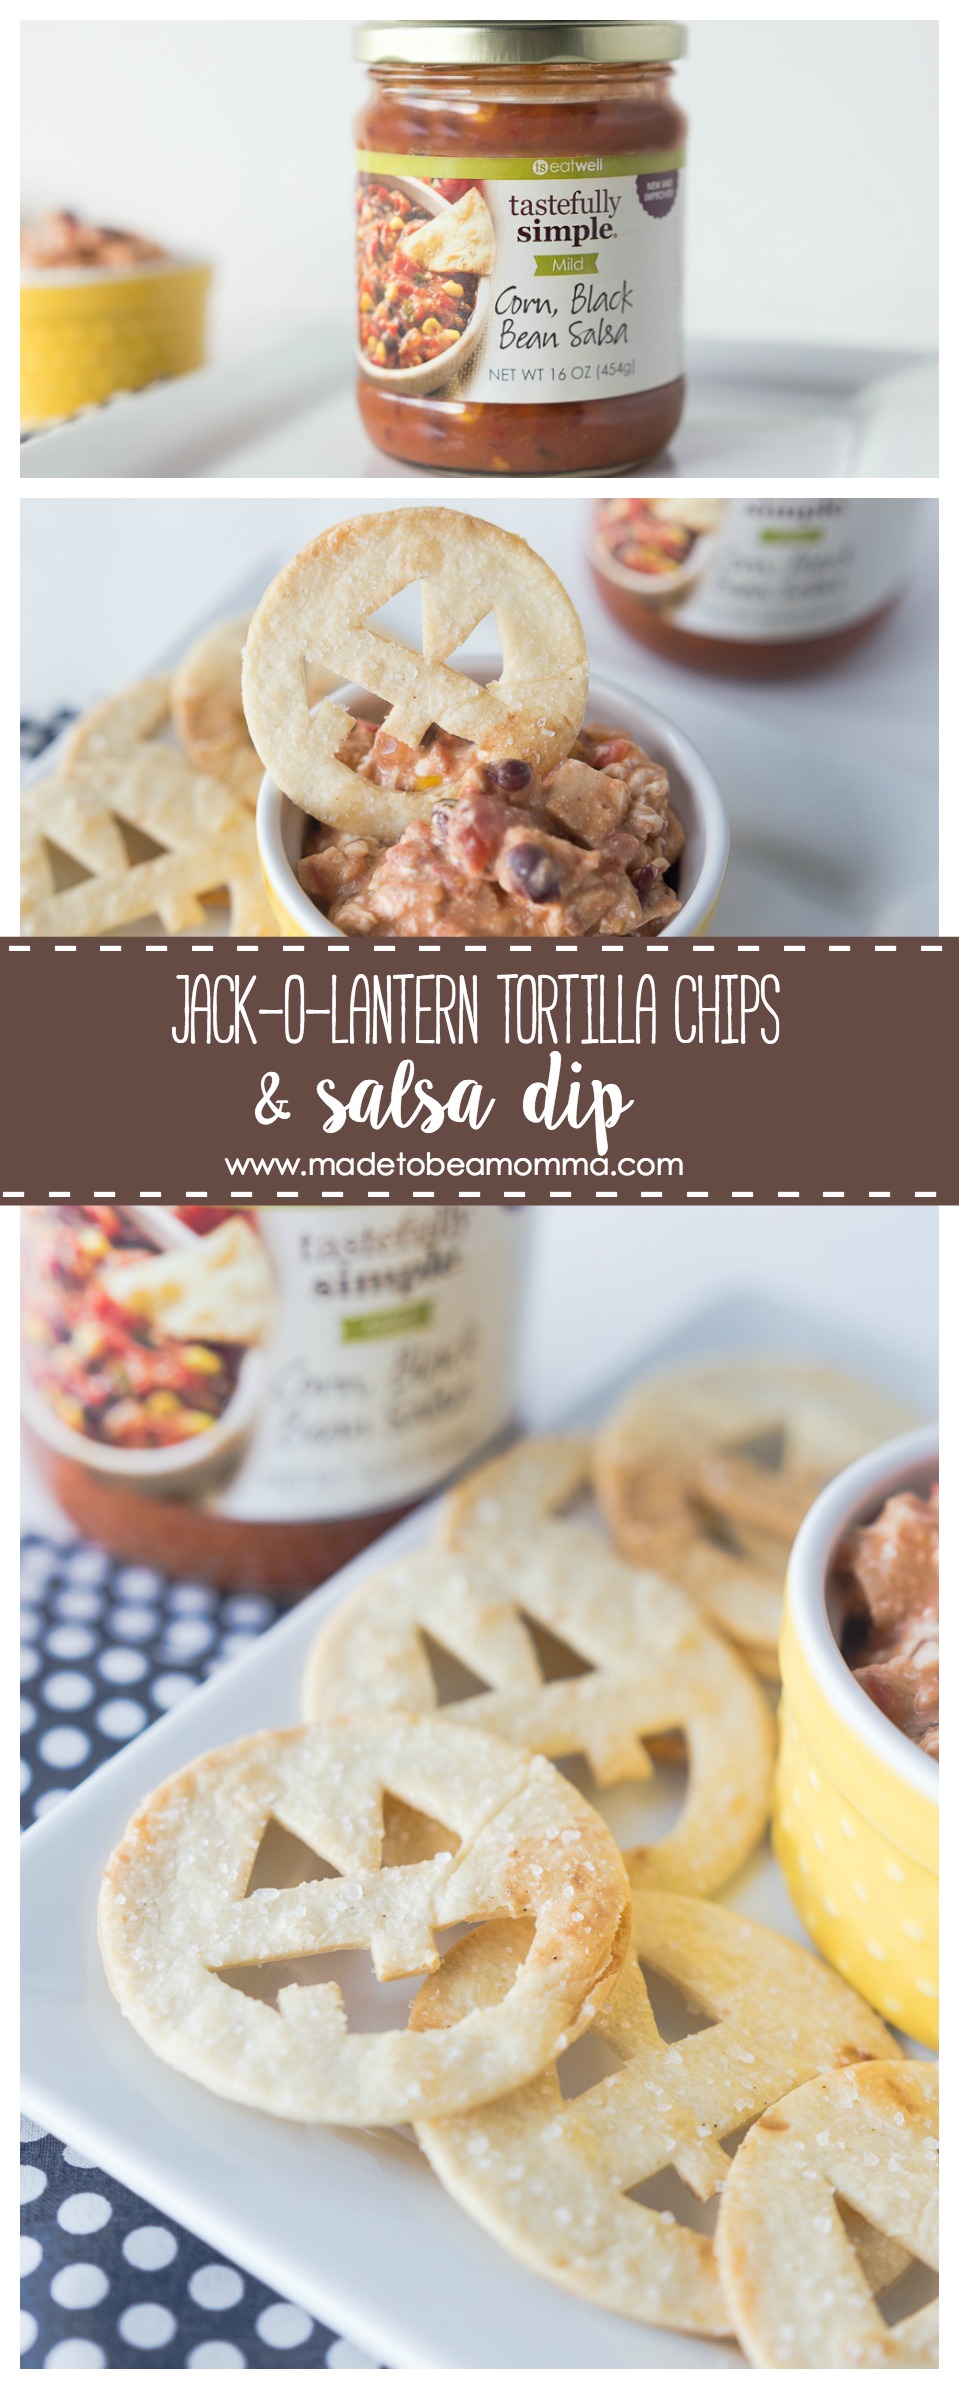 Jack-O-Lantern Tortilla Chips & Salsa Dip: a delicious treat that is perfect for family night or a fun halloween party! www.madetobeamomma.com